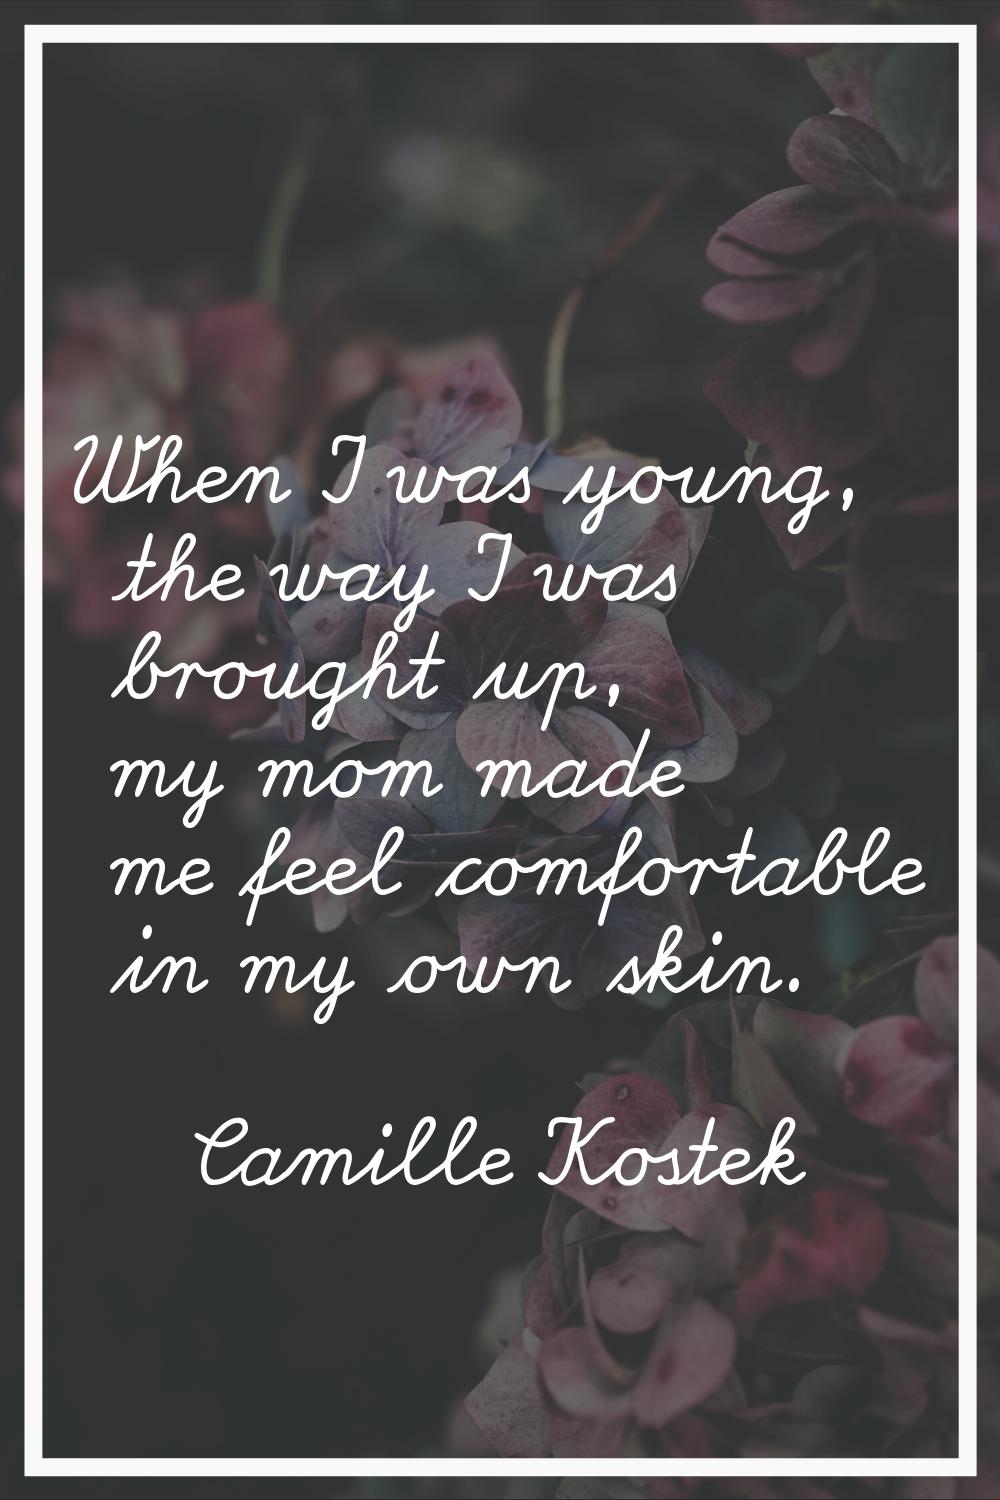 When I was young, the way I was brought up, my mom made me feel comfortable in my own skin.